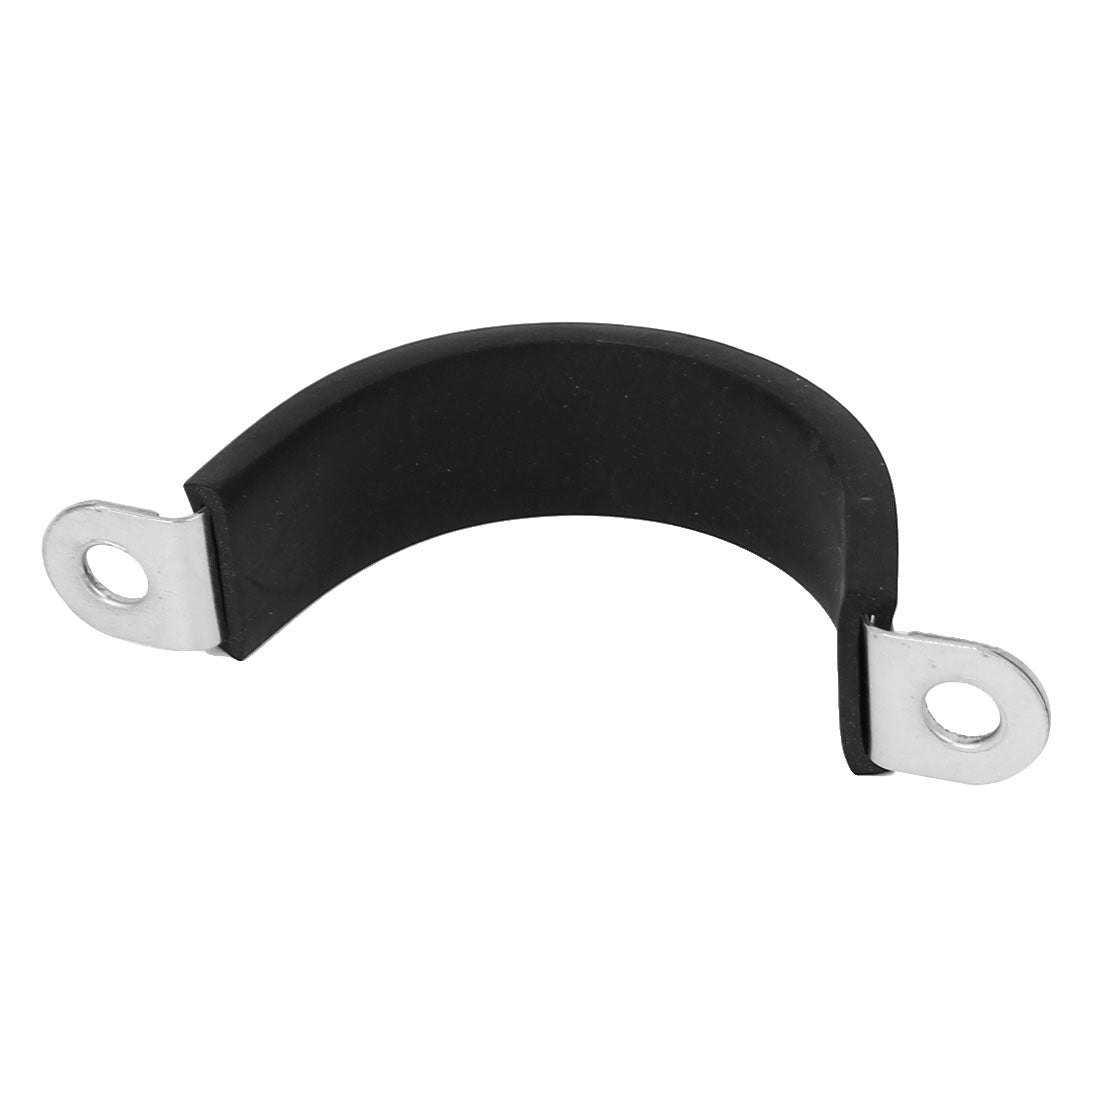 uxcell Uxcell 38mm U Clips EPDM Rubber Lined Mounting Brackets 5pcs for Pipe Tube Cable